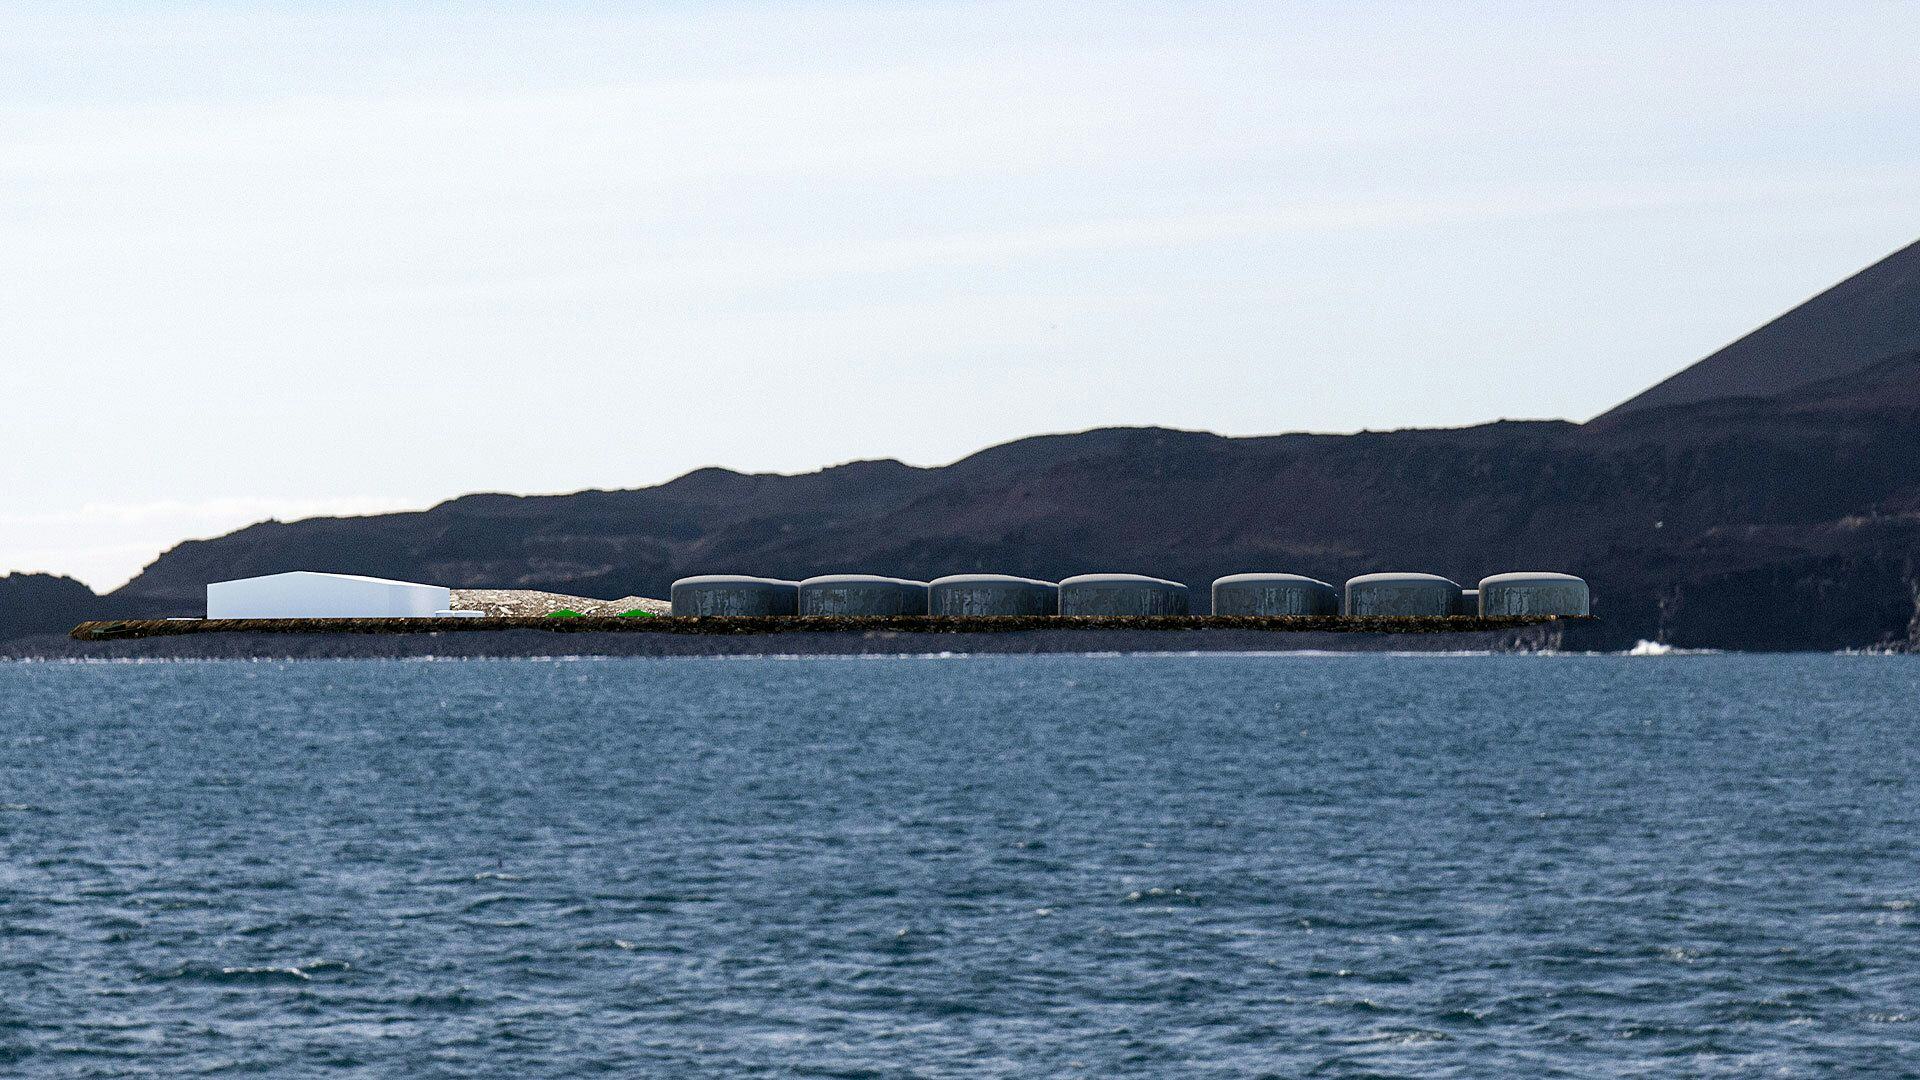 A series of rounded barrel shaped structures on a coastline set against mountain backdrop